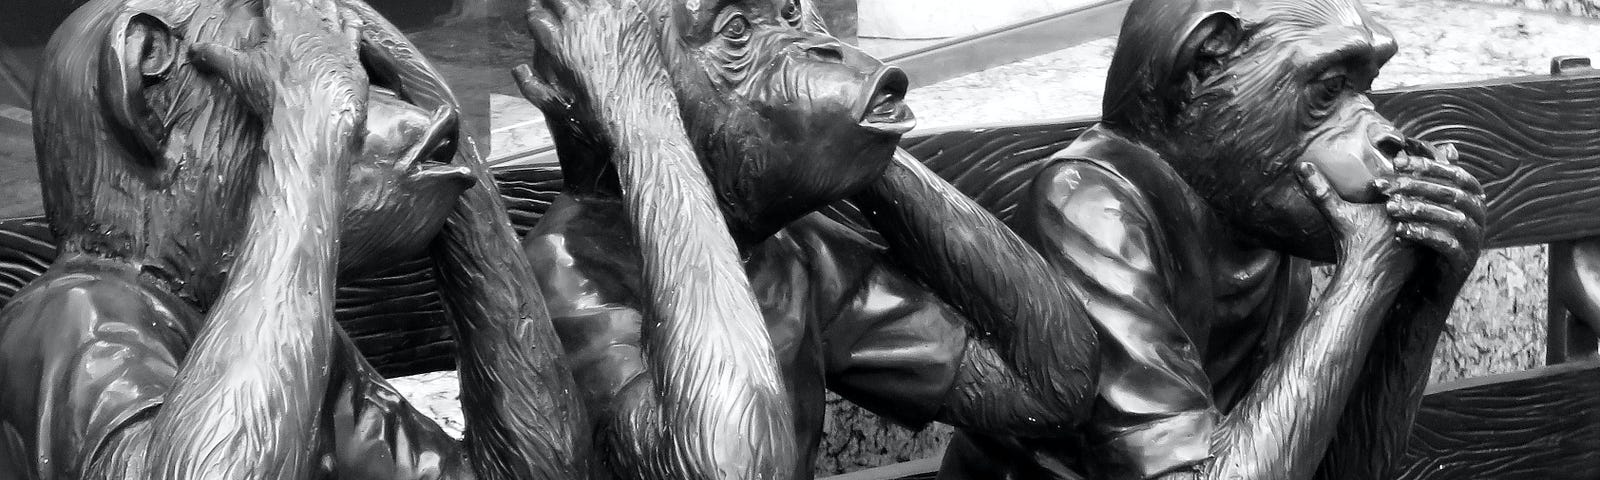 See no evil. Hear no evil. Speak no evil. Three statue monkeys sitting on a bench depict these actions.